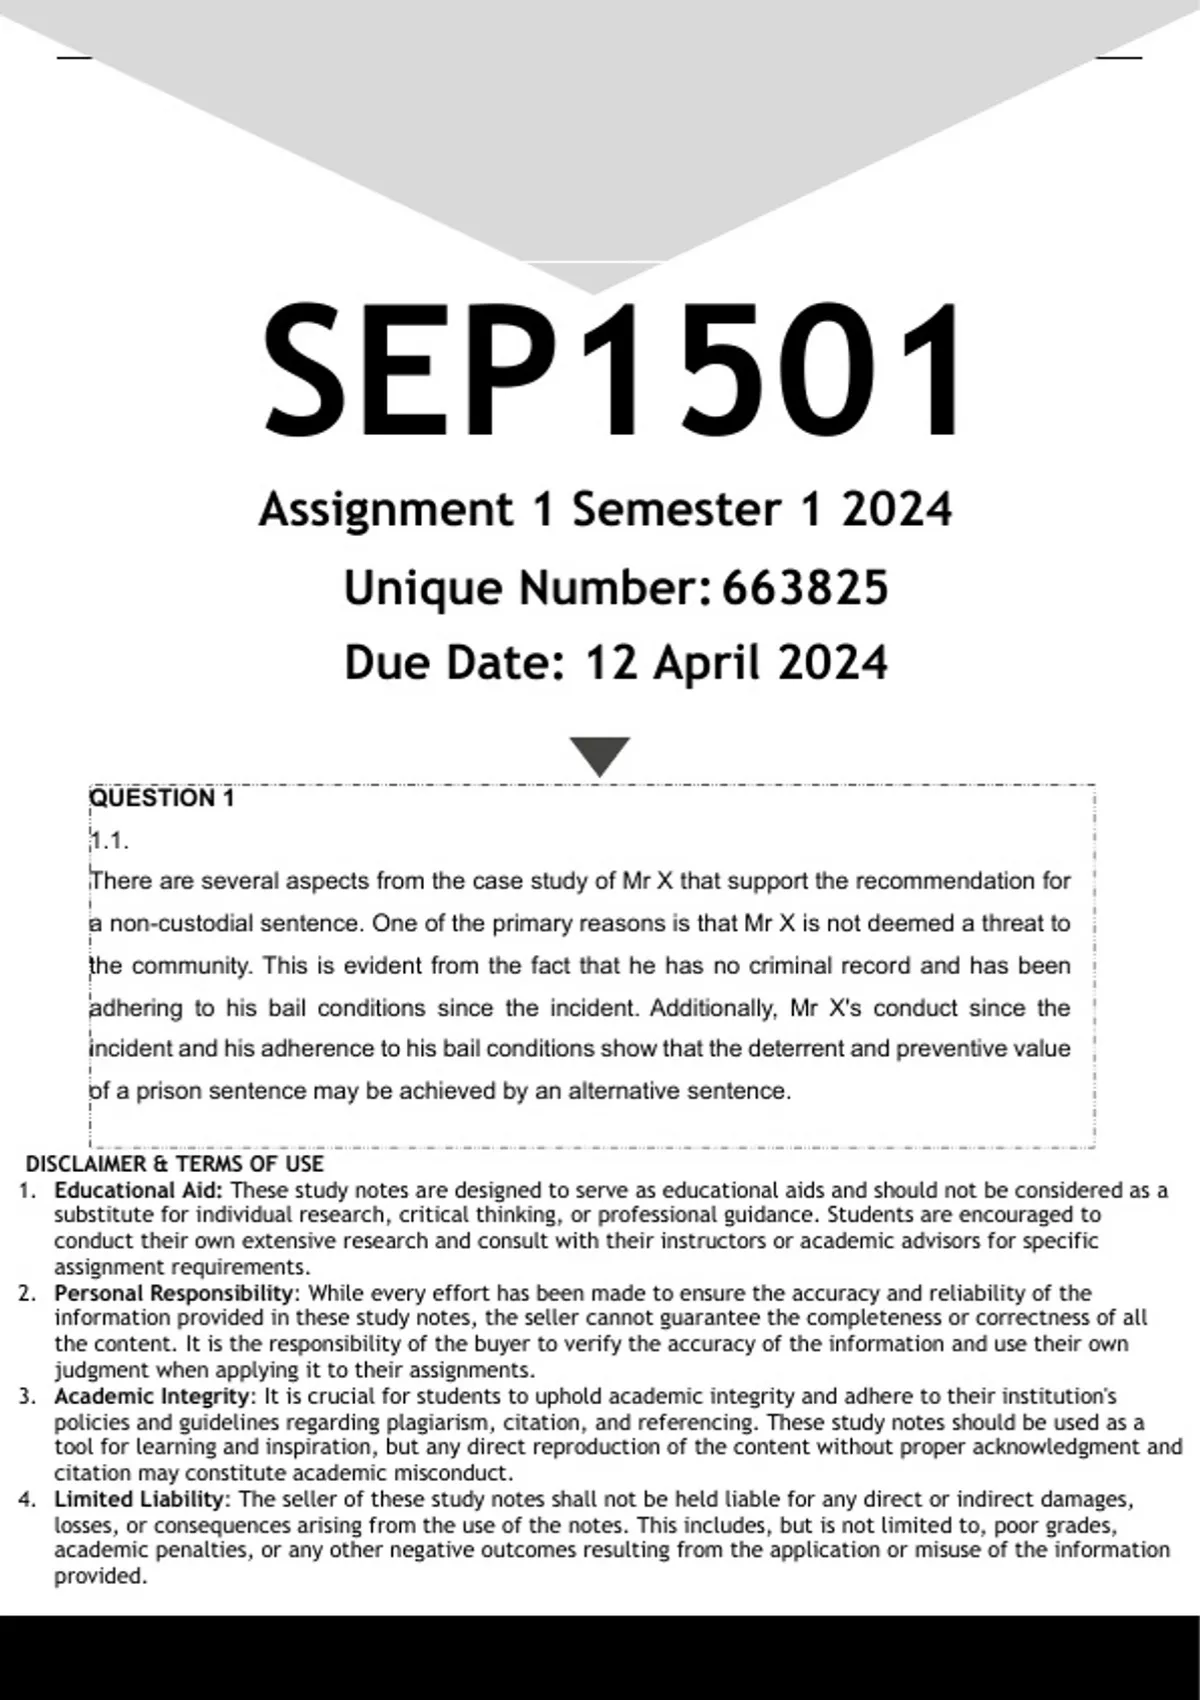 sep1501 assignment 2 answers